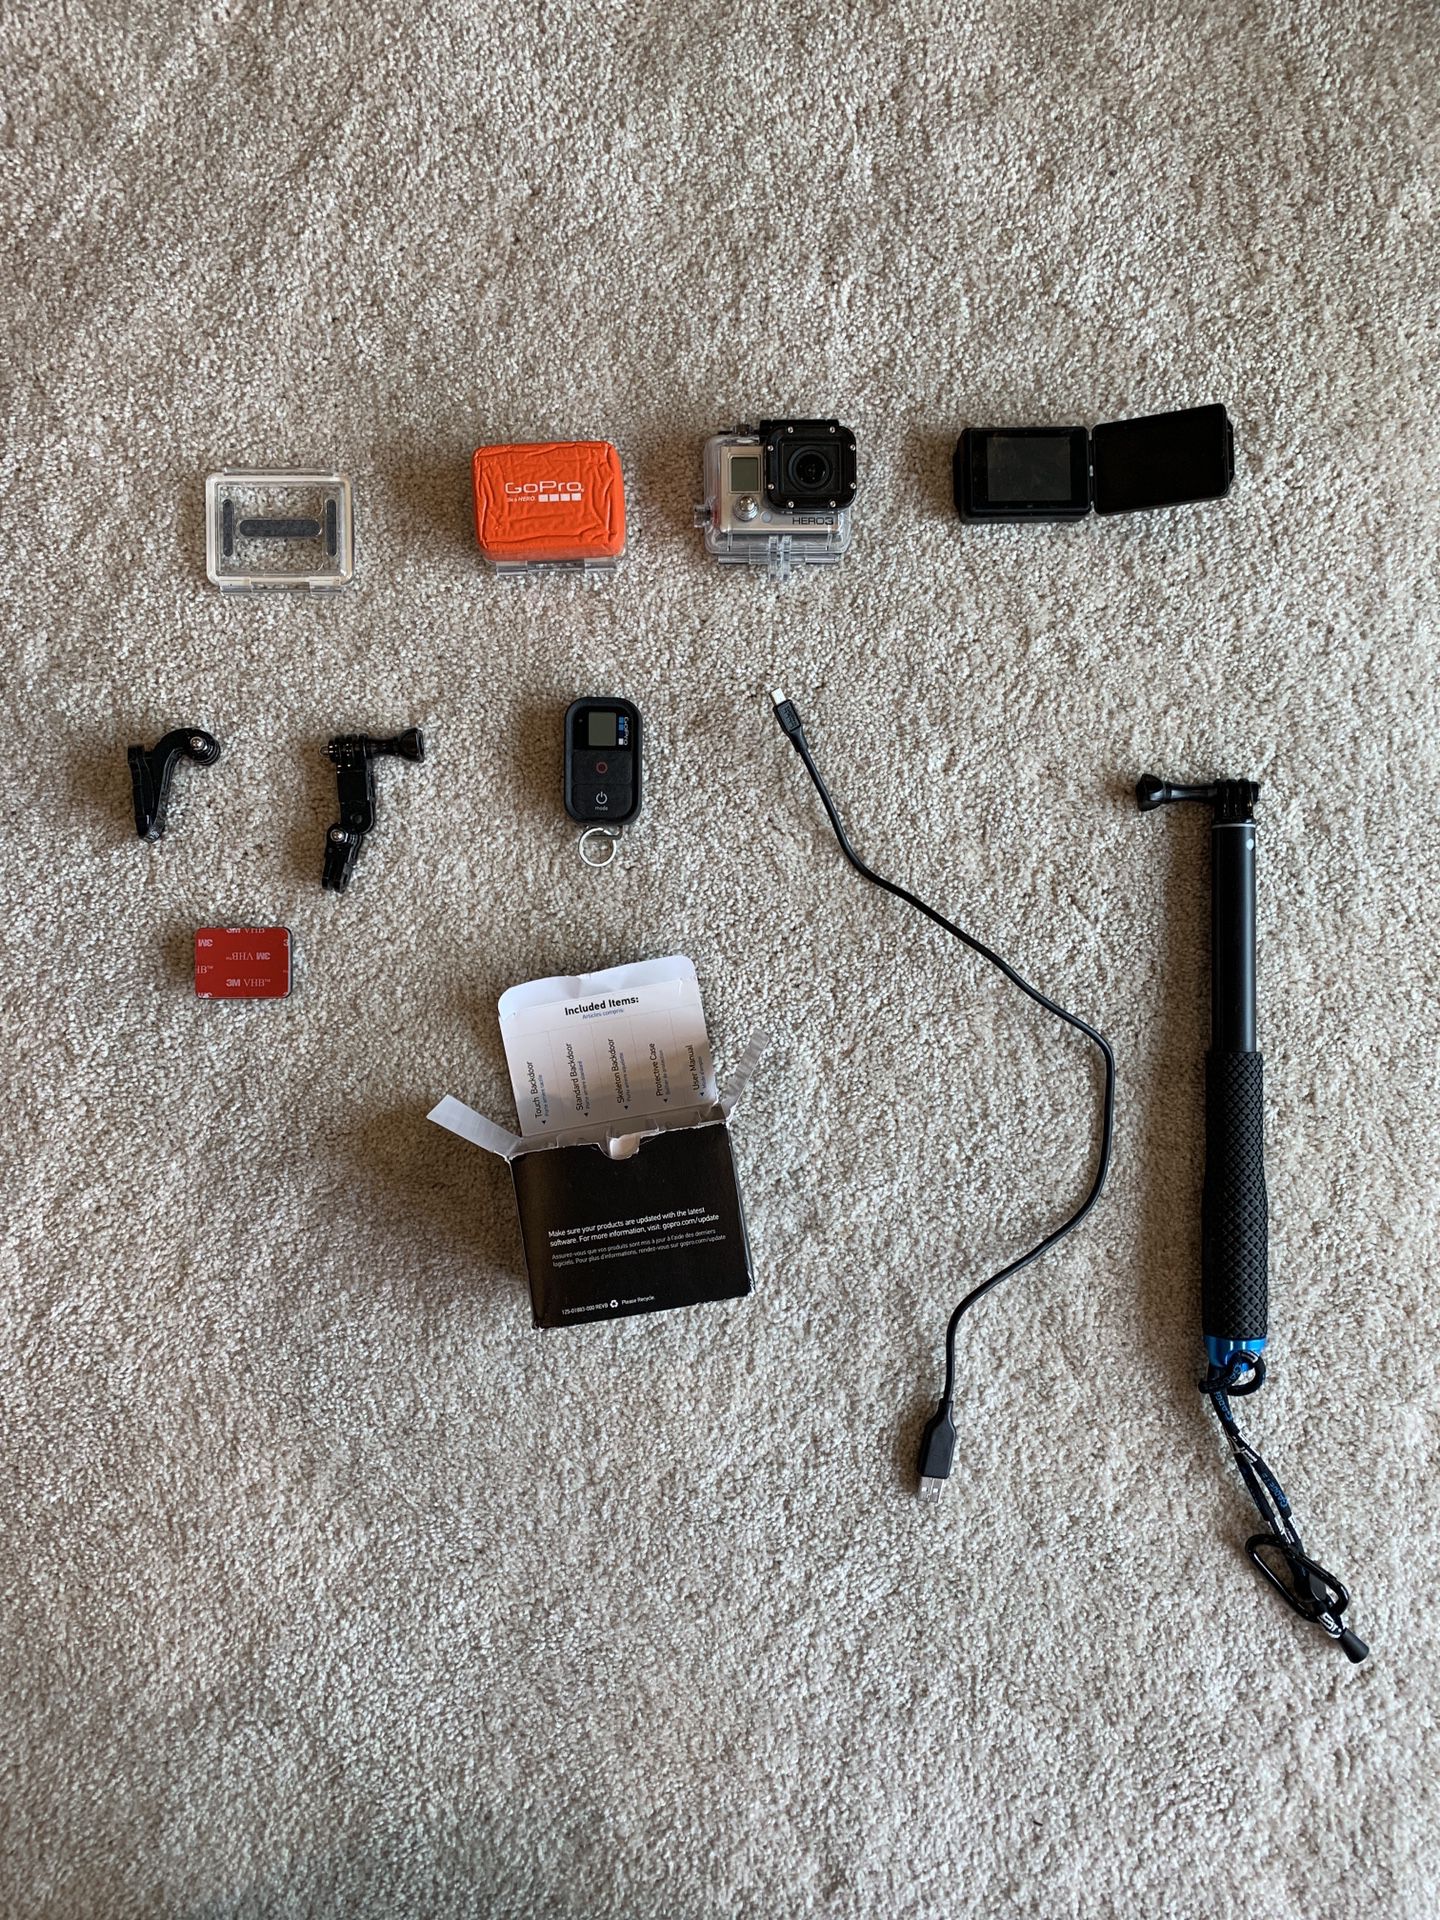 Go Pro Hero 3 - with handle and accessories